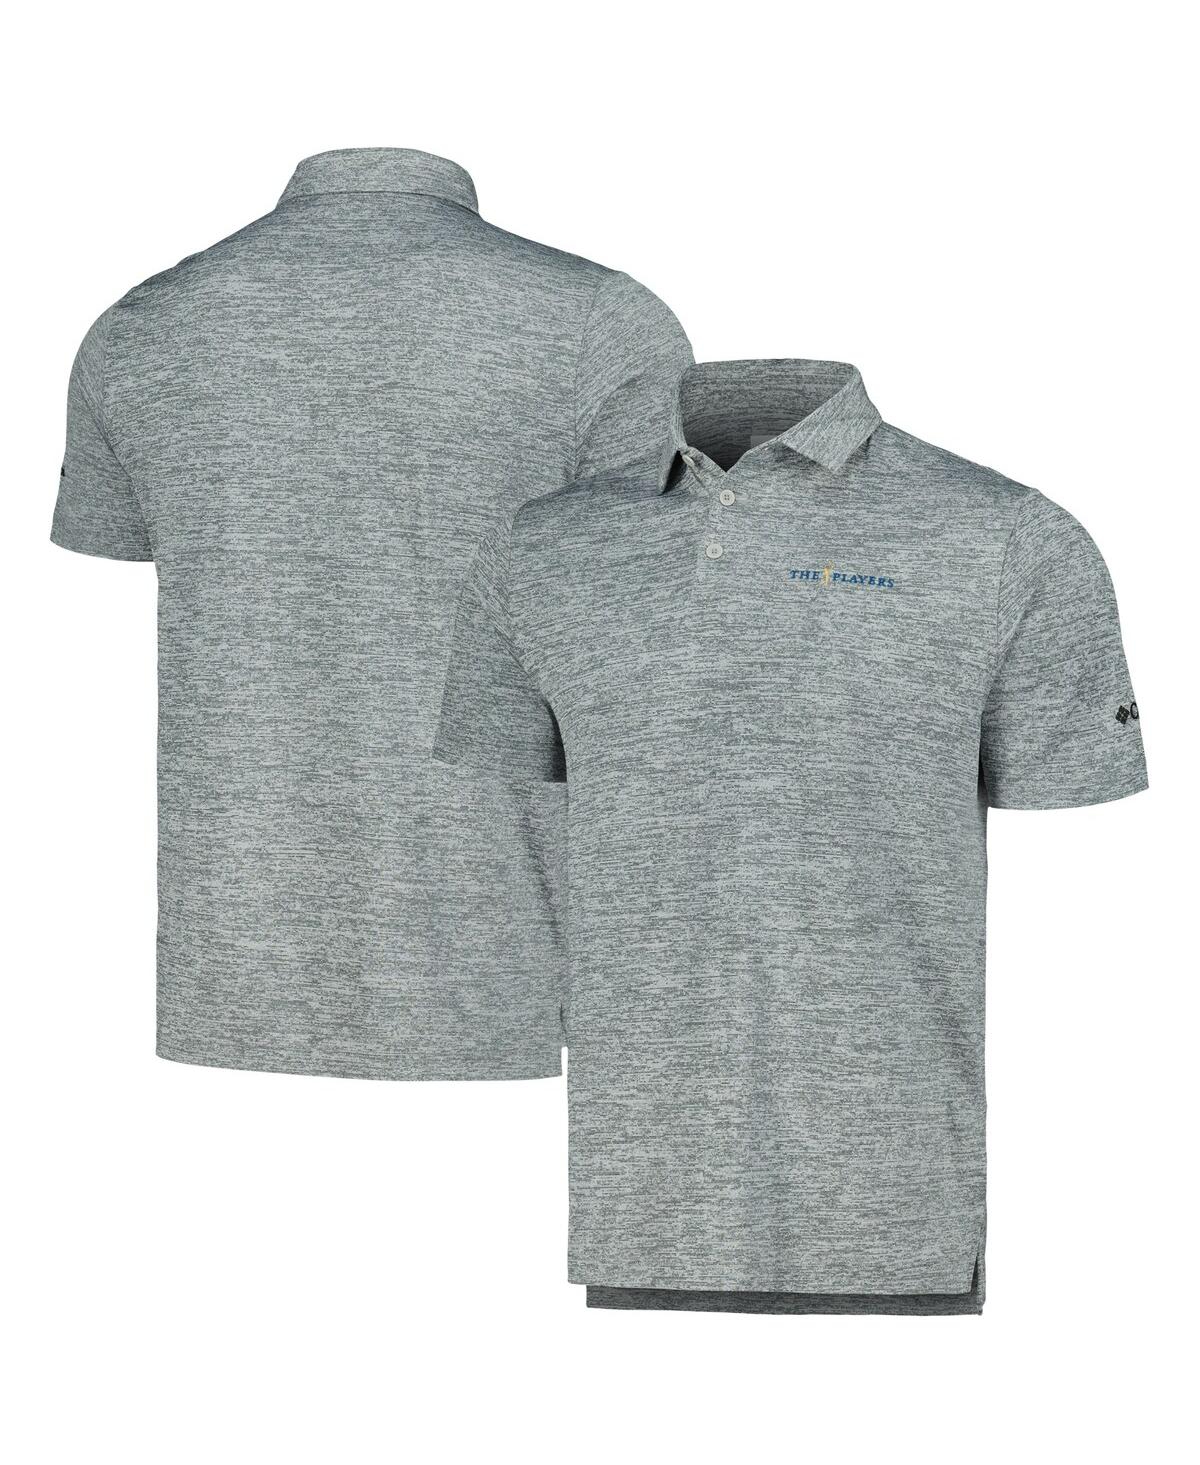 Shop Columbia Men's Gray The Players Omni-wick Final Round Polo